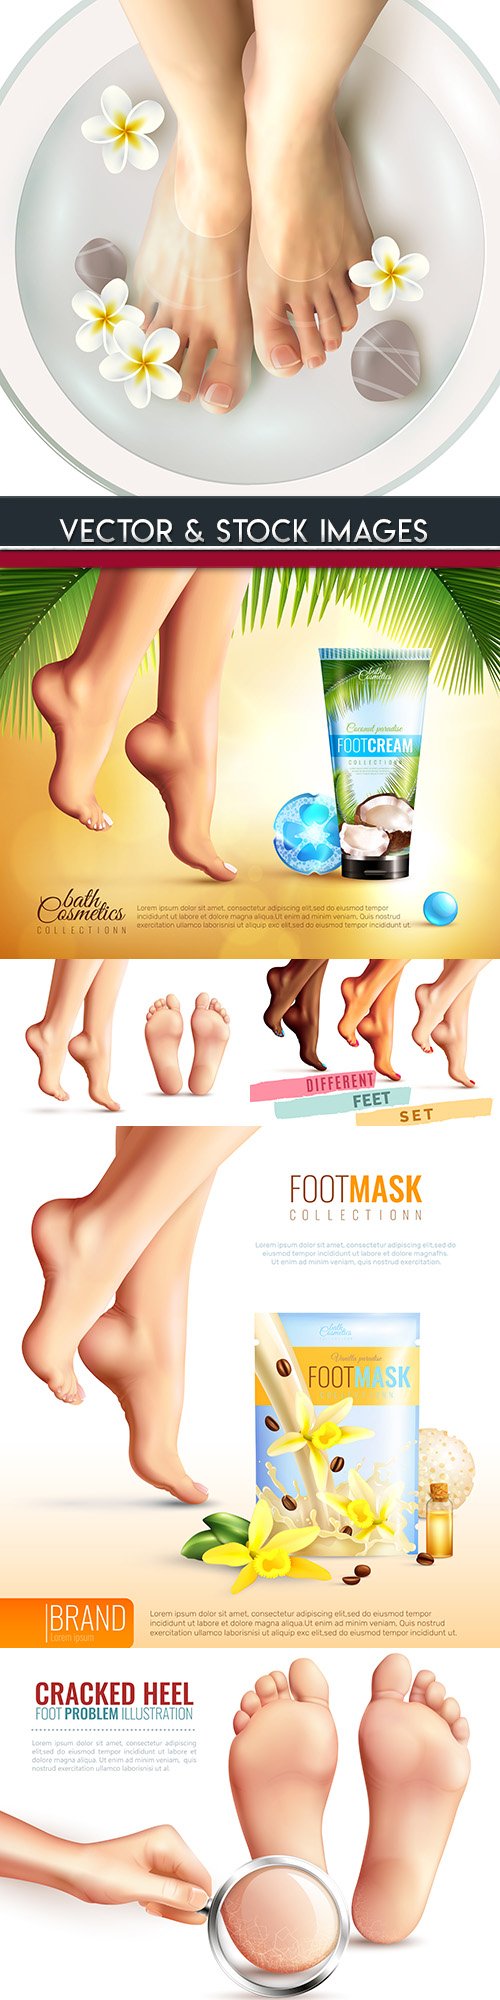 Female legs and smooth heels 3d illustration